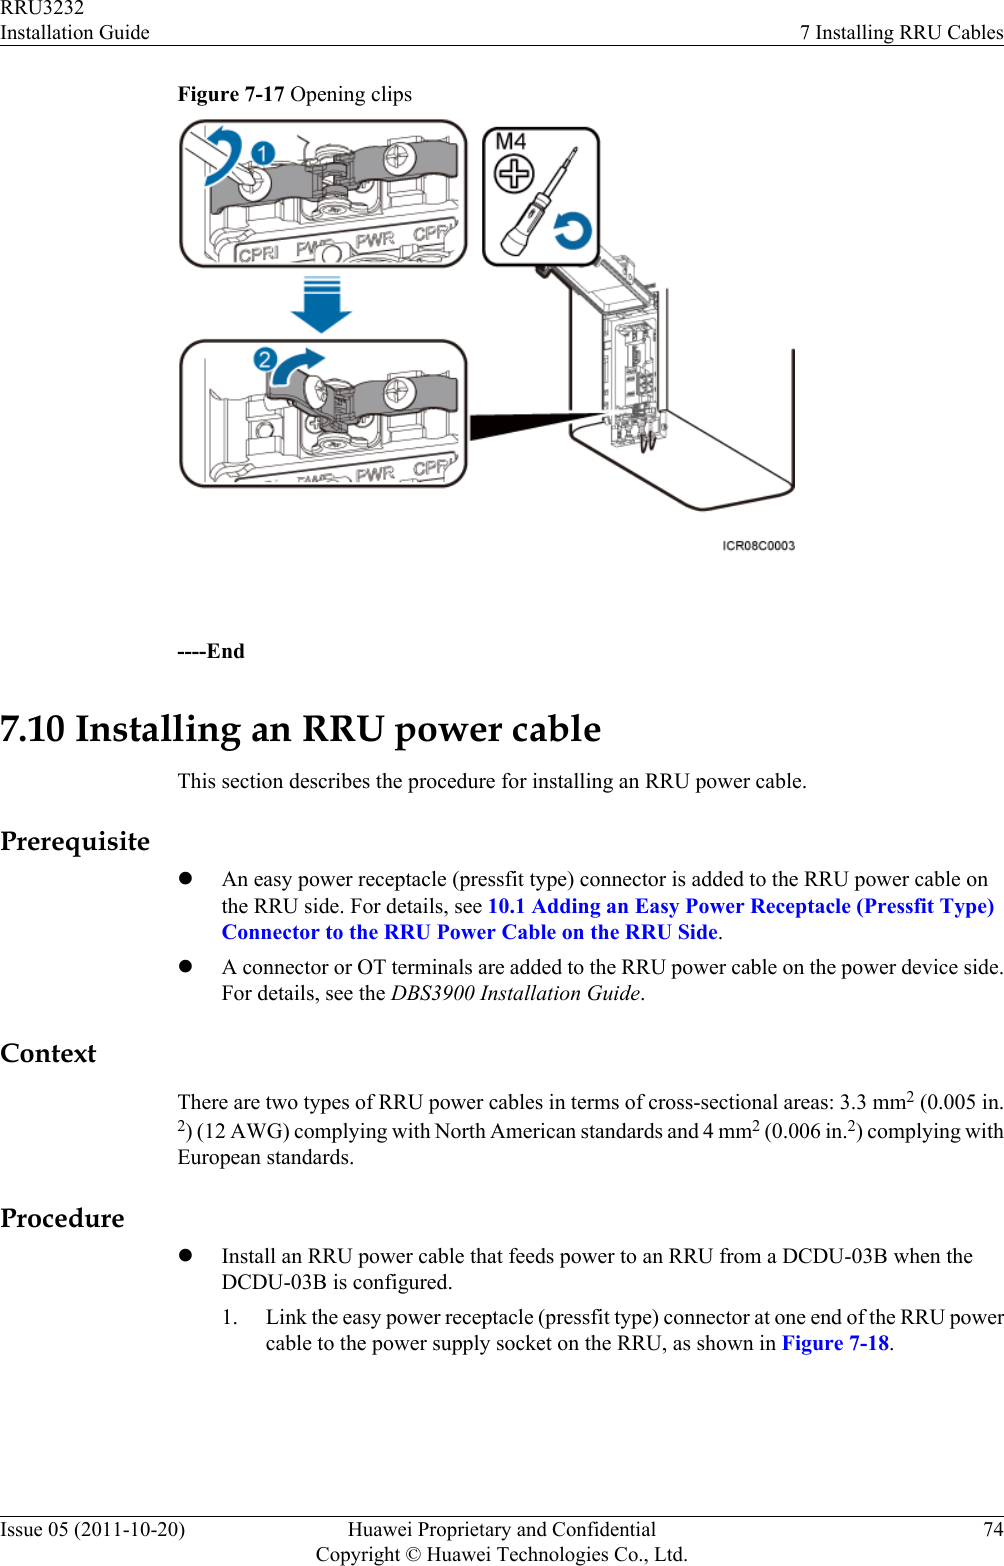 Figure 7-17 Opening clips ----End7.10 Installing an RRU power cableThis section describes the procedure for installing an RRU power cable.PrerequisitelAn easy power receptacle (pressfit type) connector is added to the RRU power cable onthe RRU side. For details, see 10.1 Adding an Easy Power Receptacle (Pressfit Type)Connector to the RRU Power Cable on the RRU Side.lA connector or OT terminals are added to the RRU power cable on the power device side.For details, see the DBS3900 Installation Guide.ContextThere are two types of RRU power cables in terms of cross-sectional areas: 3.3 mm2 (0.005 in.2) (12 AWG) complying with North American standards and 4 mm2 (0.006 in.2) complying withEuropean standards.ProcedurelInstall an RRU power cable that feeds power to an RRU from a DCDU-03B when theDCDU-03B is configured.1. Link the easy power receptacle (pressfit type) connector at one end of the RRU powercable to the power supply socket on the RRU, as shown in Figure 7-18.RRU3232Installation Guide 7 Installing RRU CablesIssue 05 (2011-10-20) Huawei Proprietary and ConfidentialCopyright © Huawei Technologies Co., Ltd.74